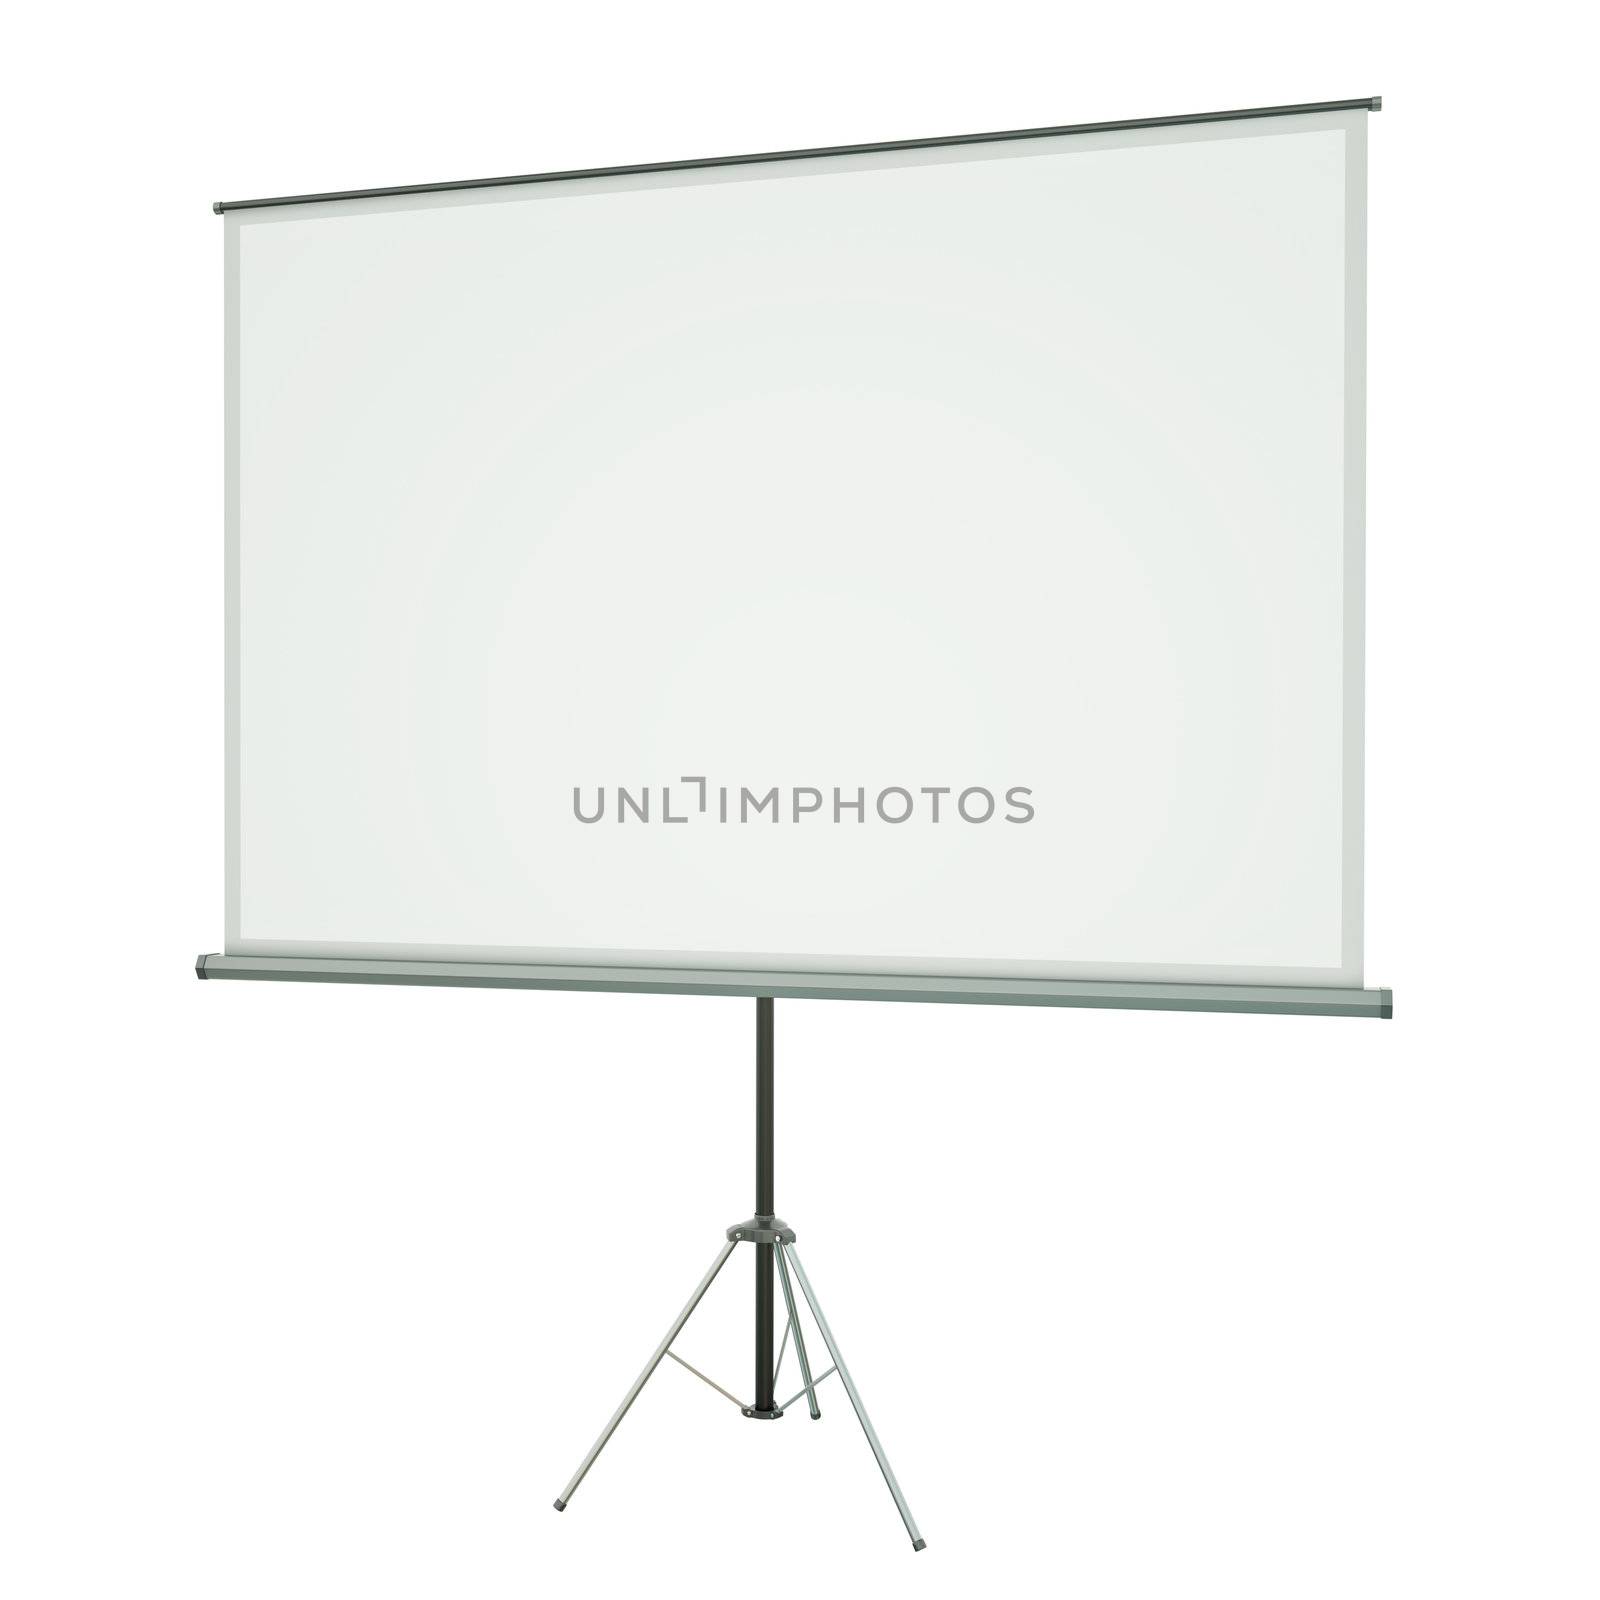 Blank portable conference projection screen over white background. 3D rendered image